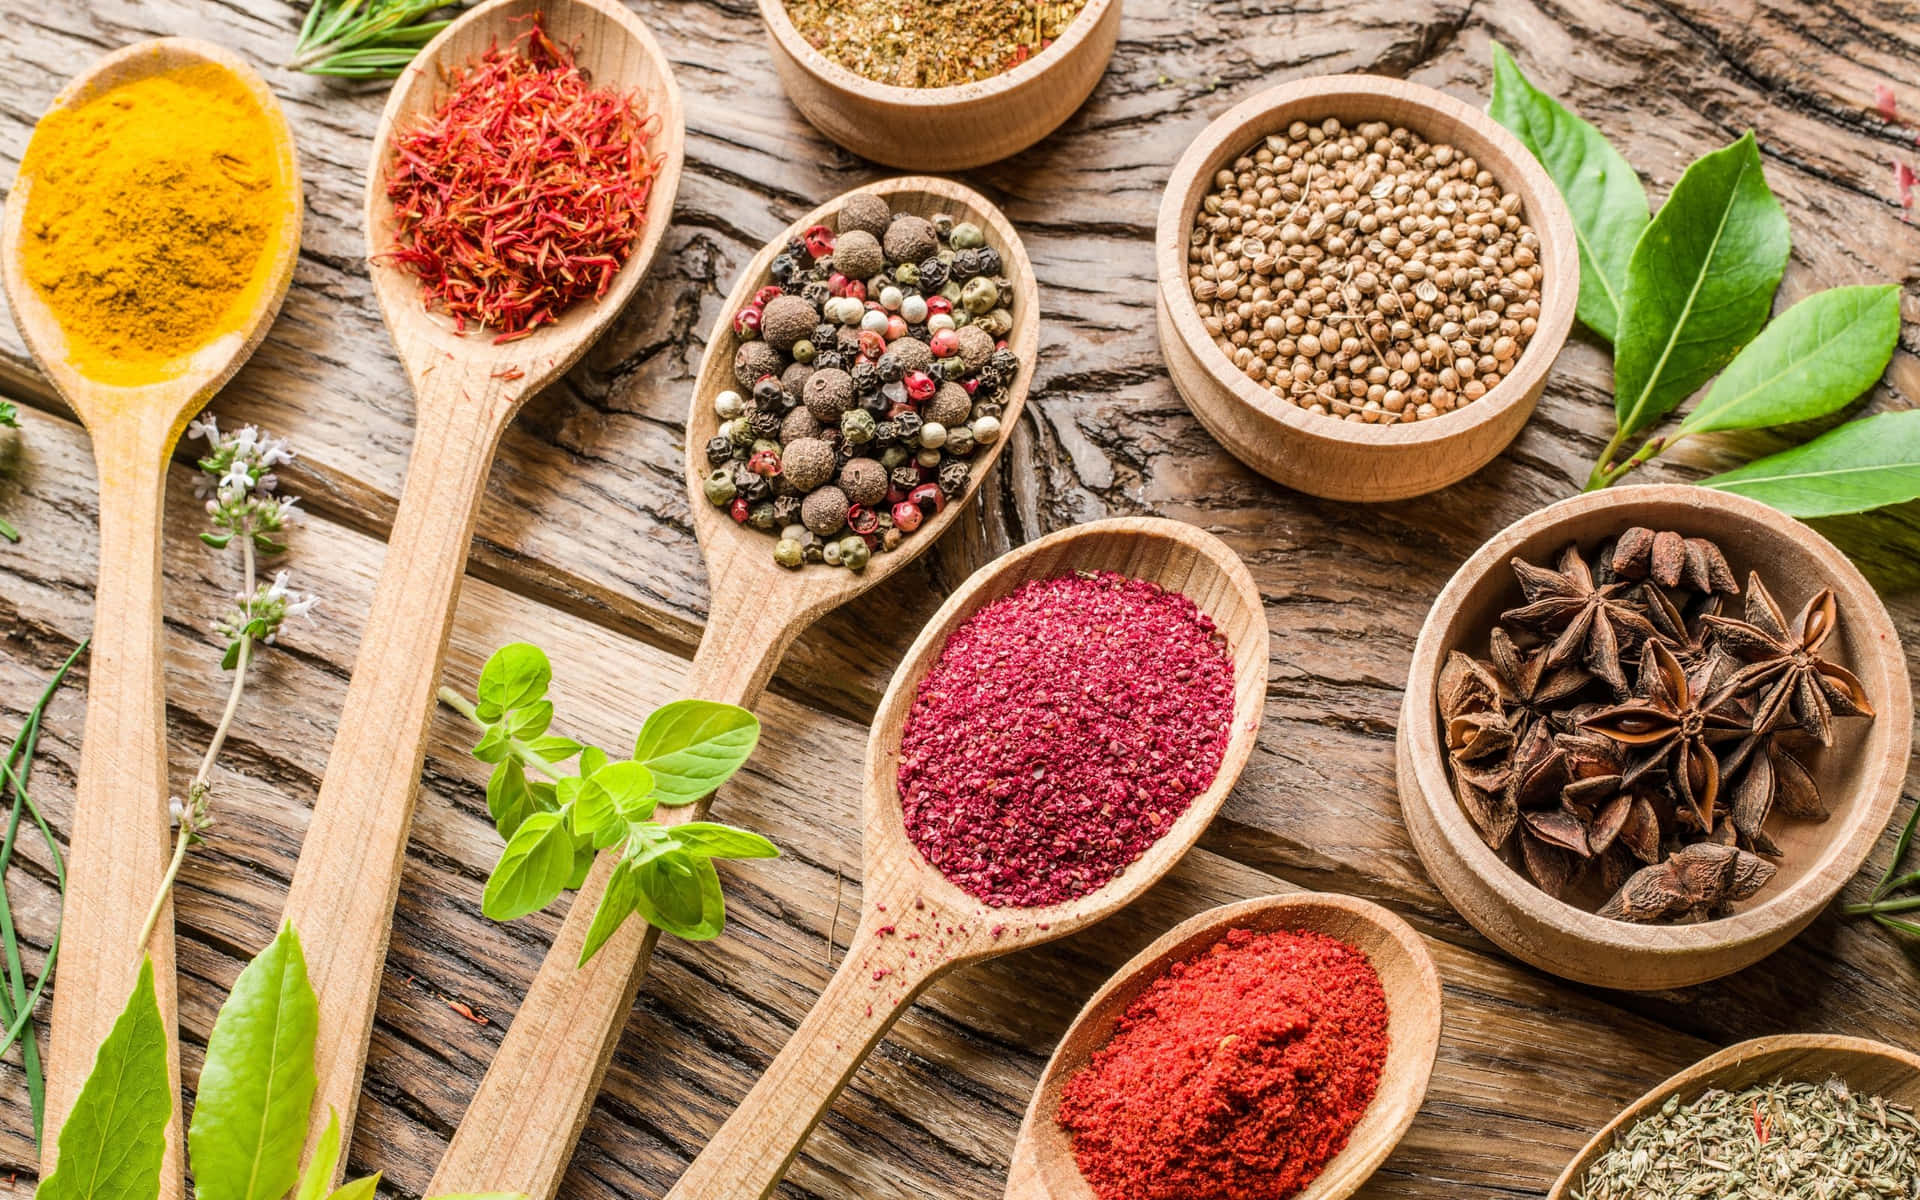 Spice up your home with a variety of colorful, fragrant spices